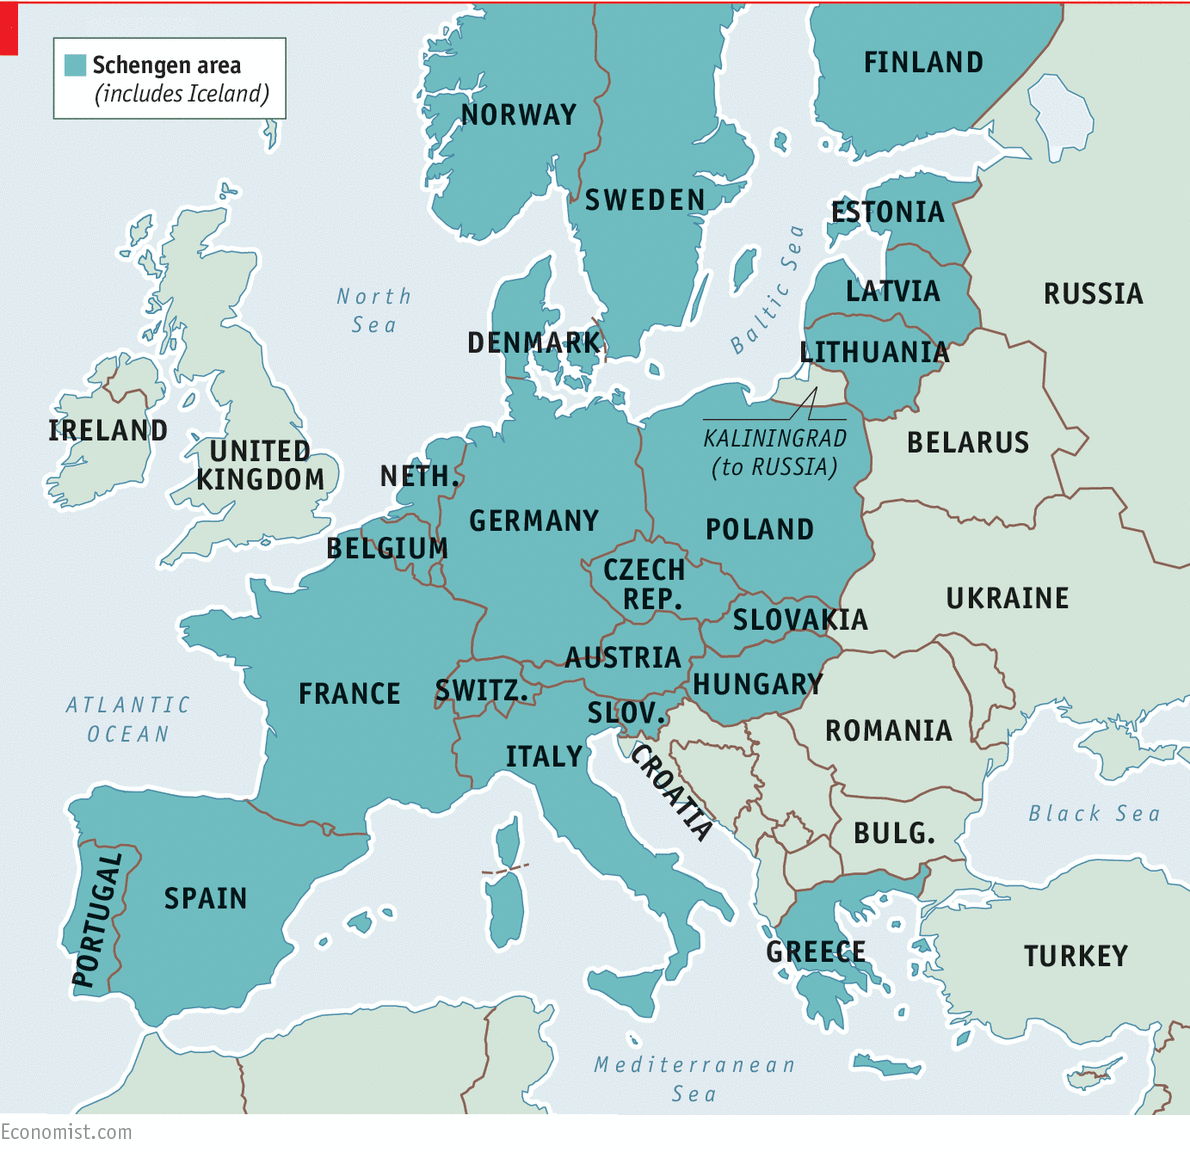 Map of the Schengen Area, Europe's Border free Travel Zone 